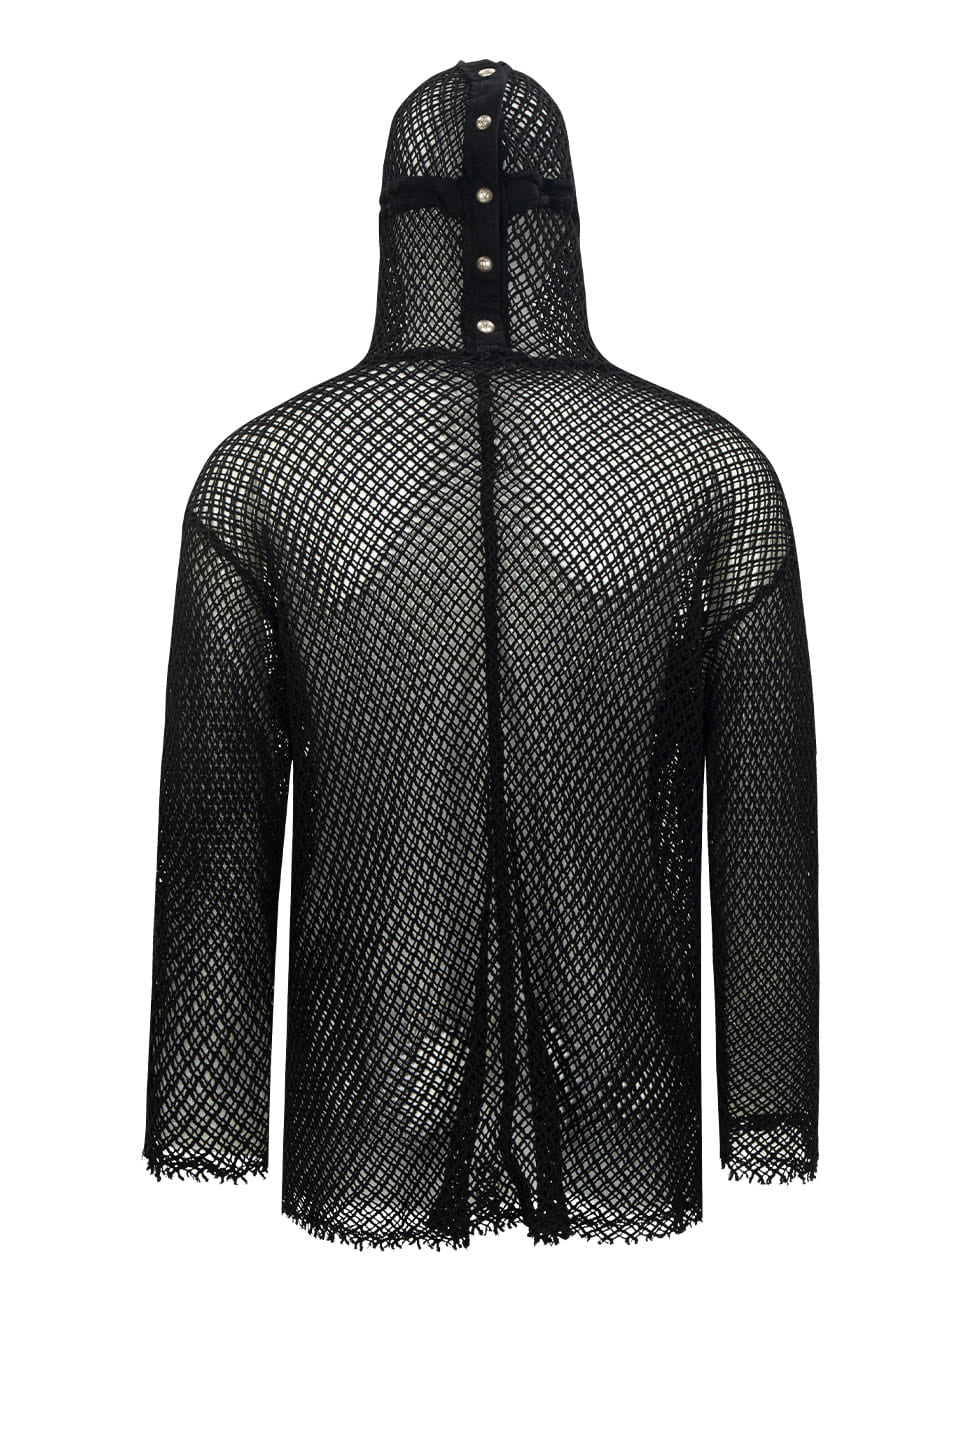 Mithril Armor Hooded Sleeve